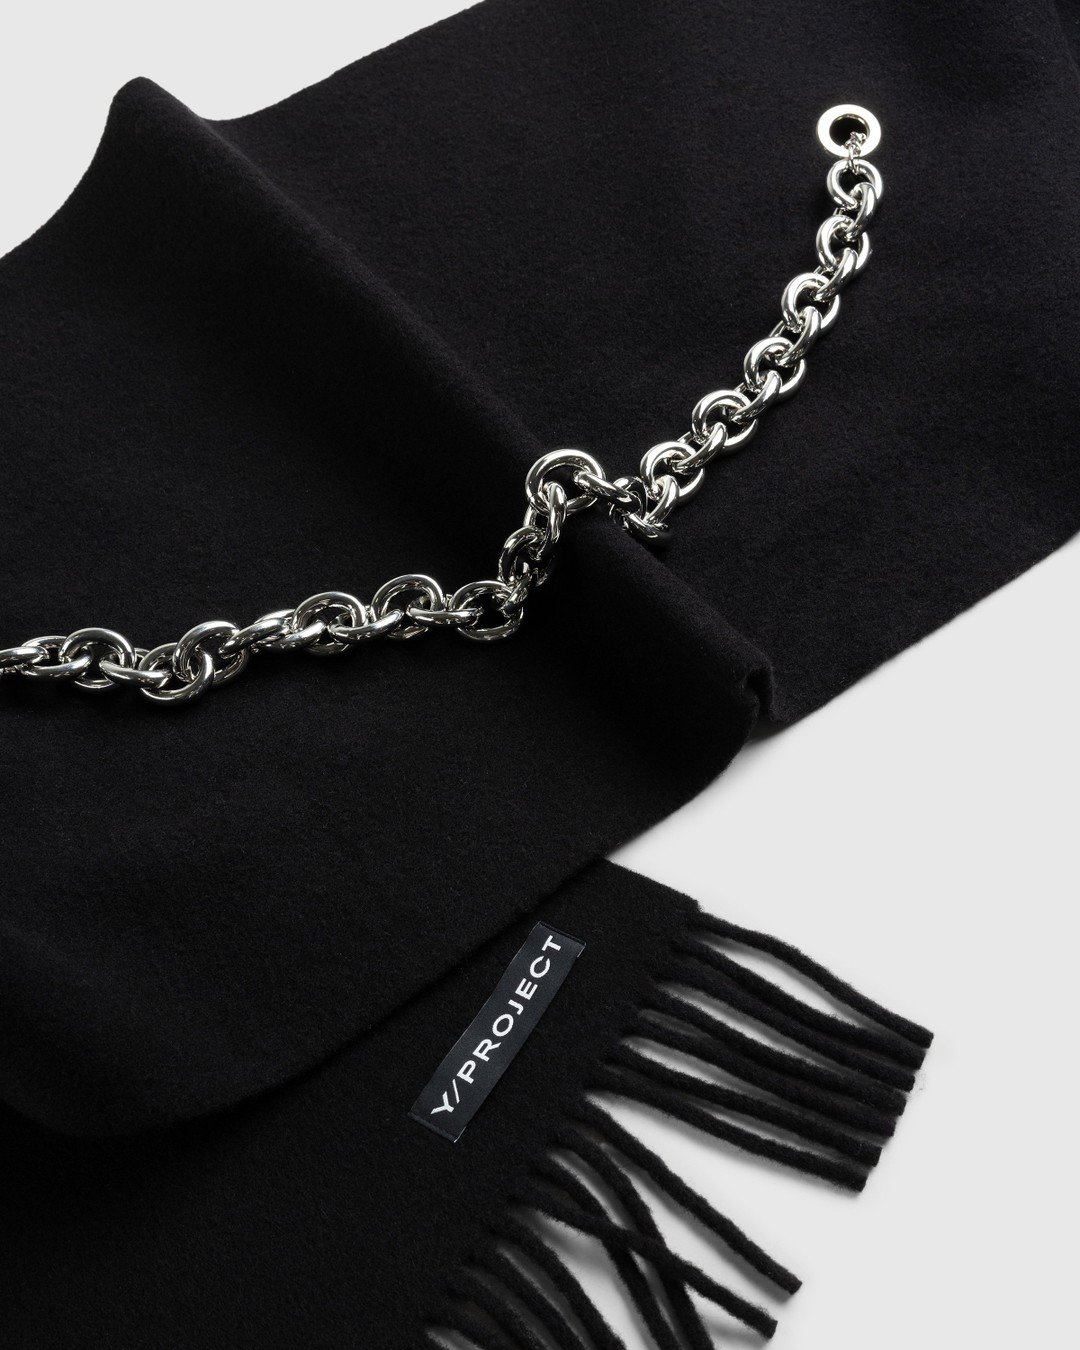 Y/Project – Chain Scarf Black/Silver - Scarves - Black - Image 5